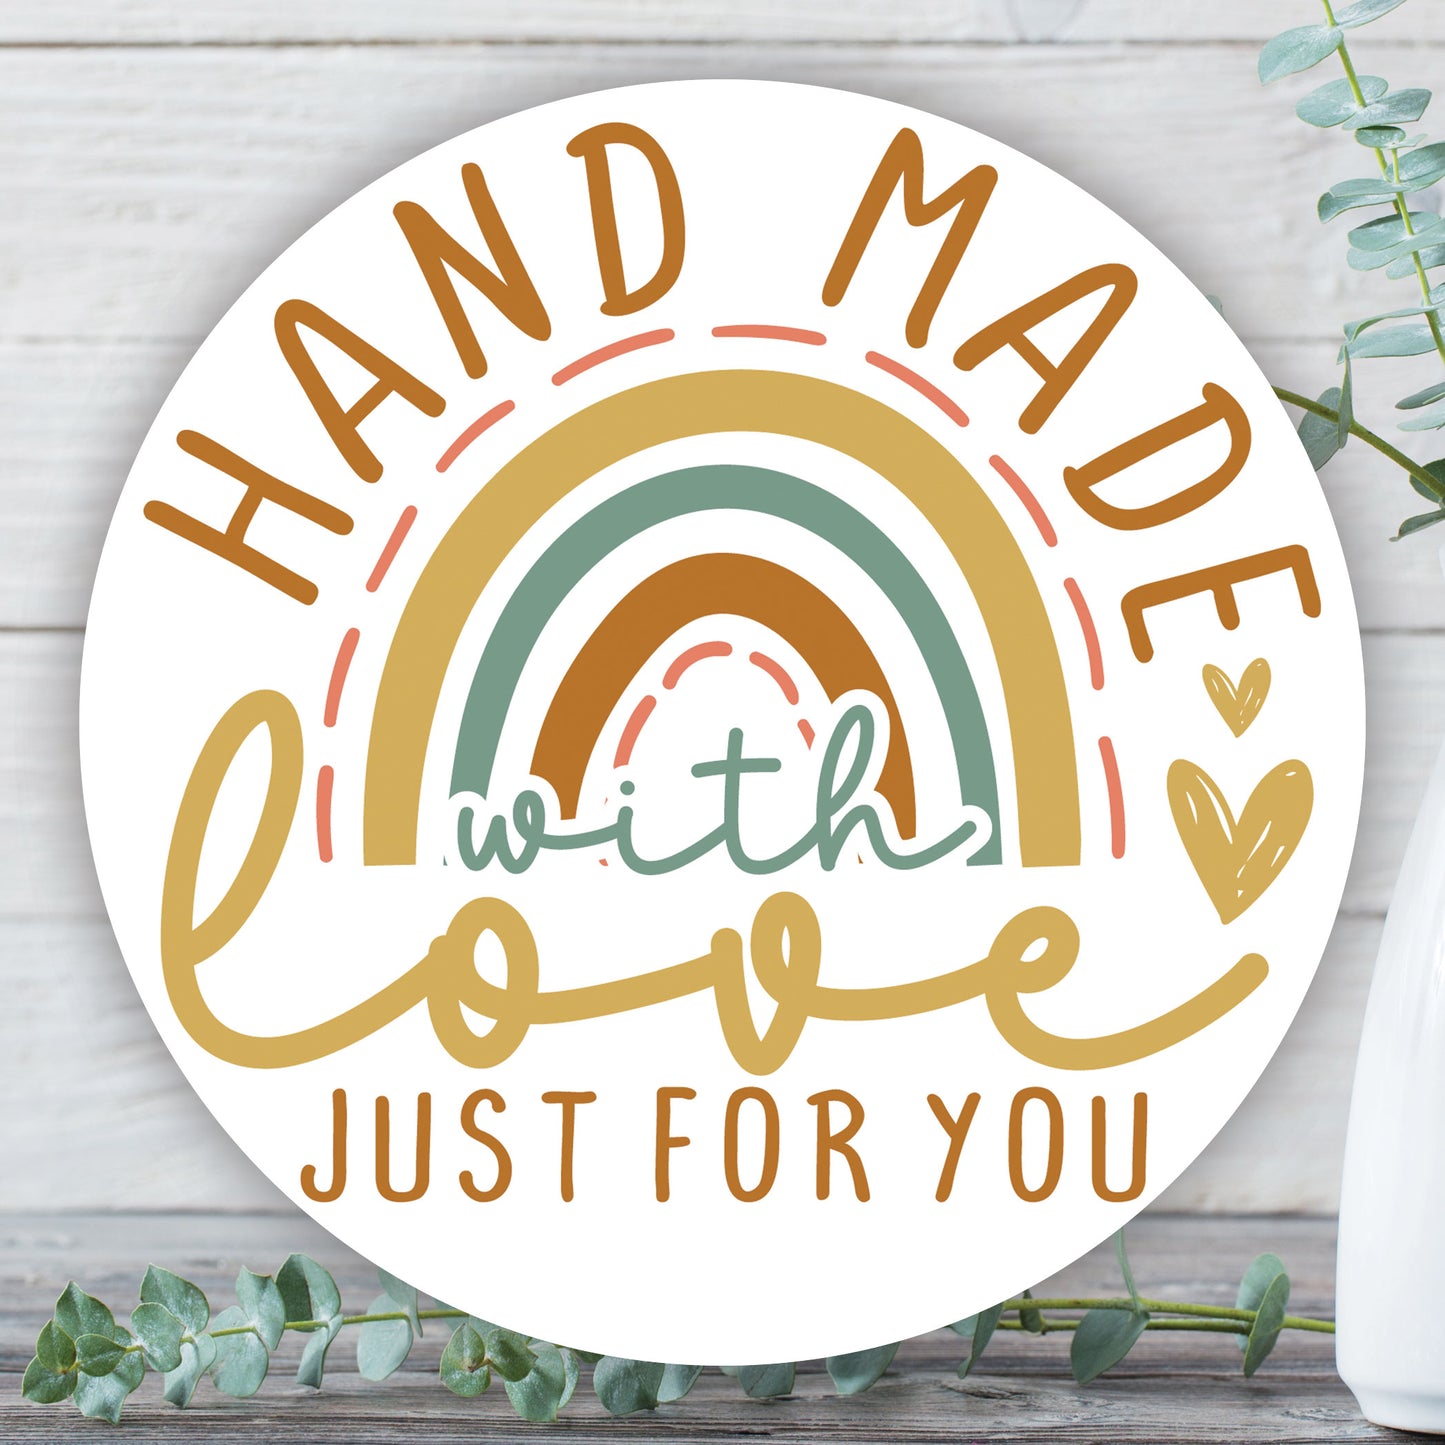 Hand Made With Love Sticker